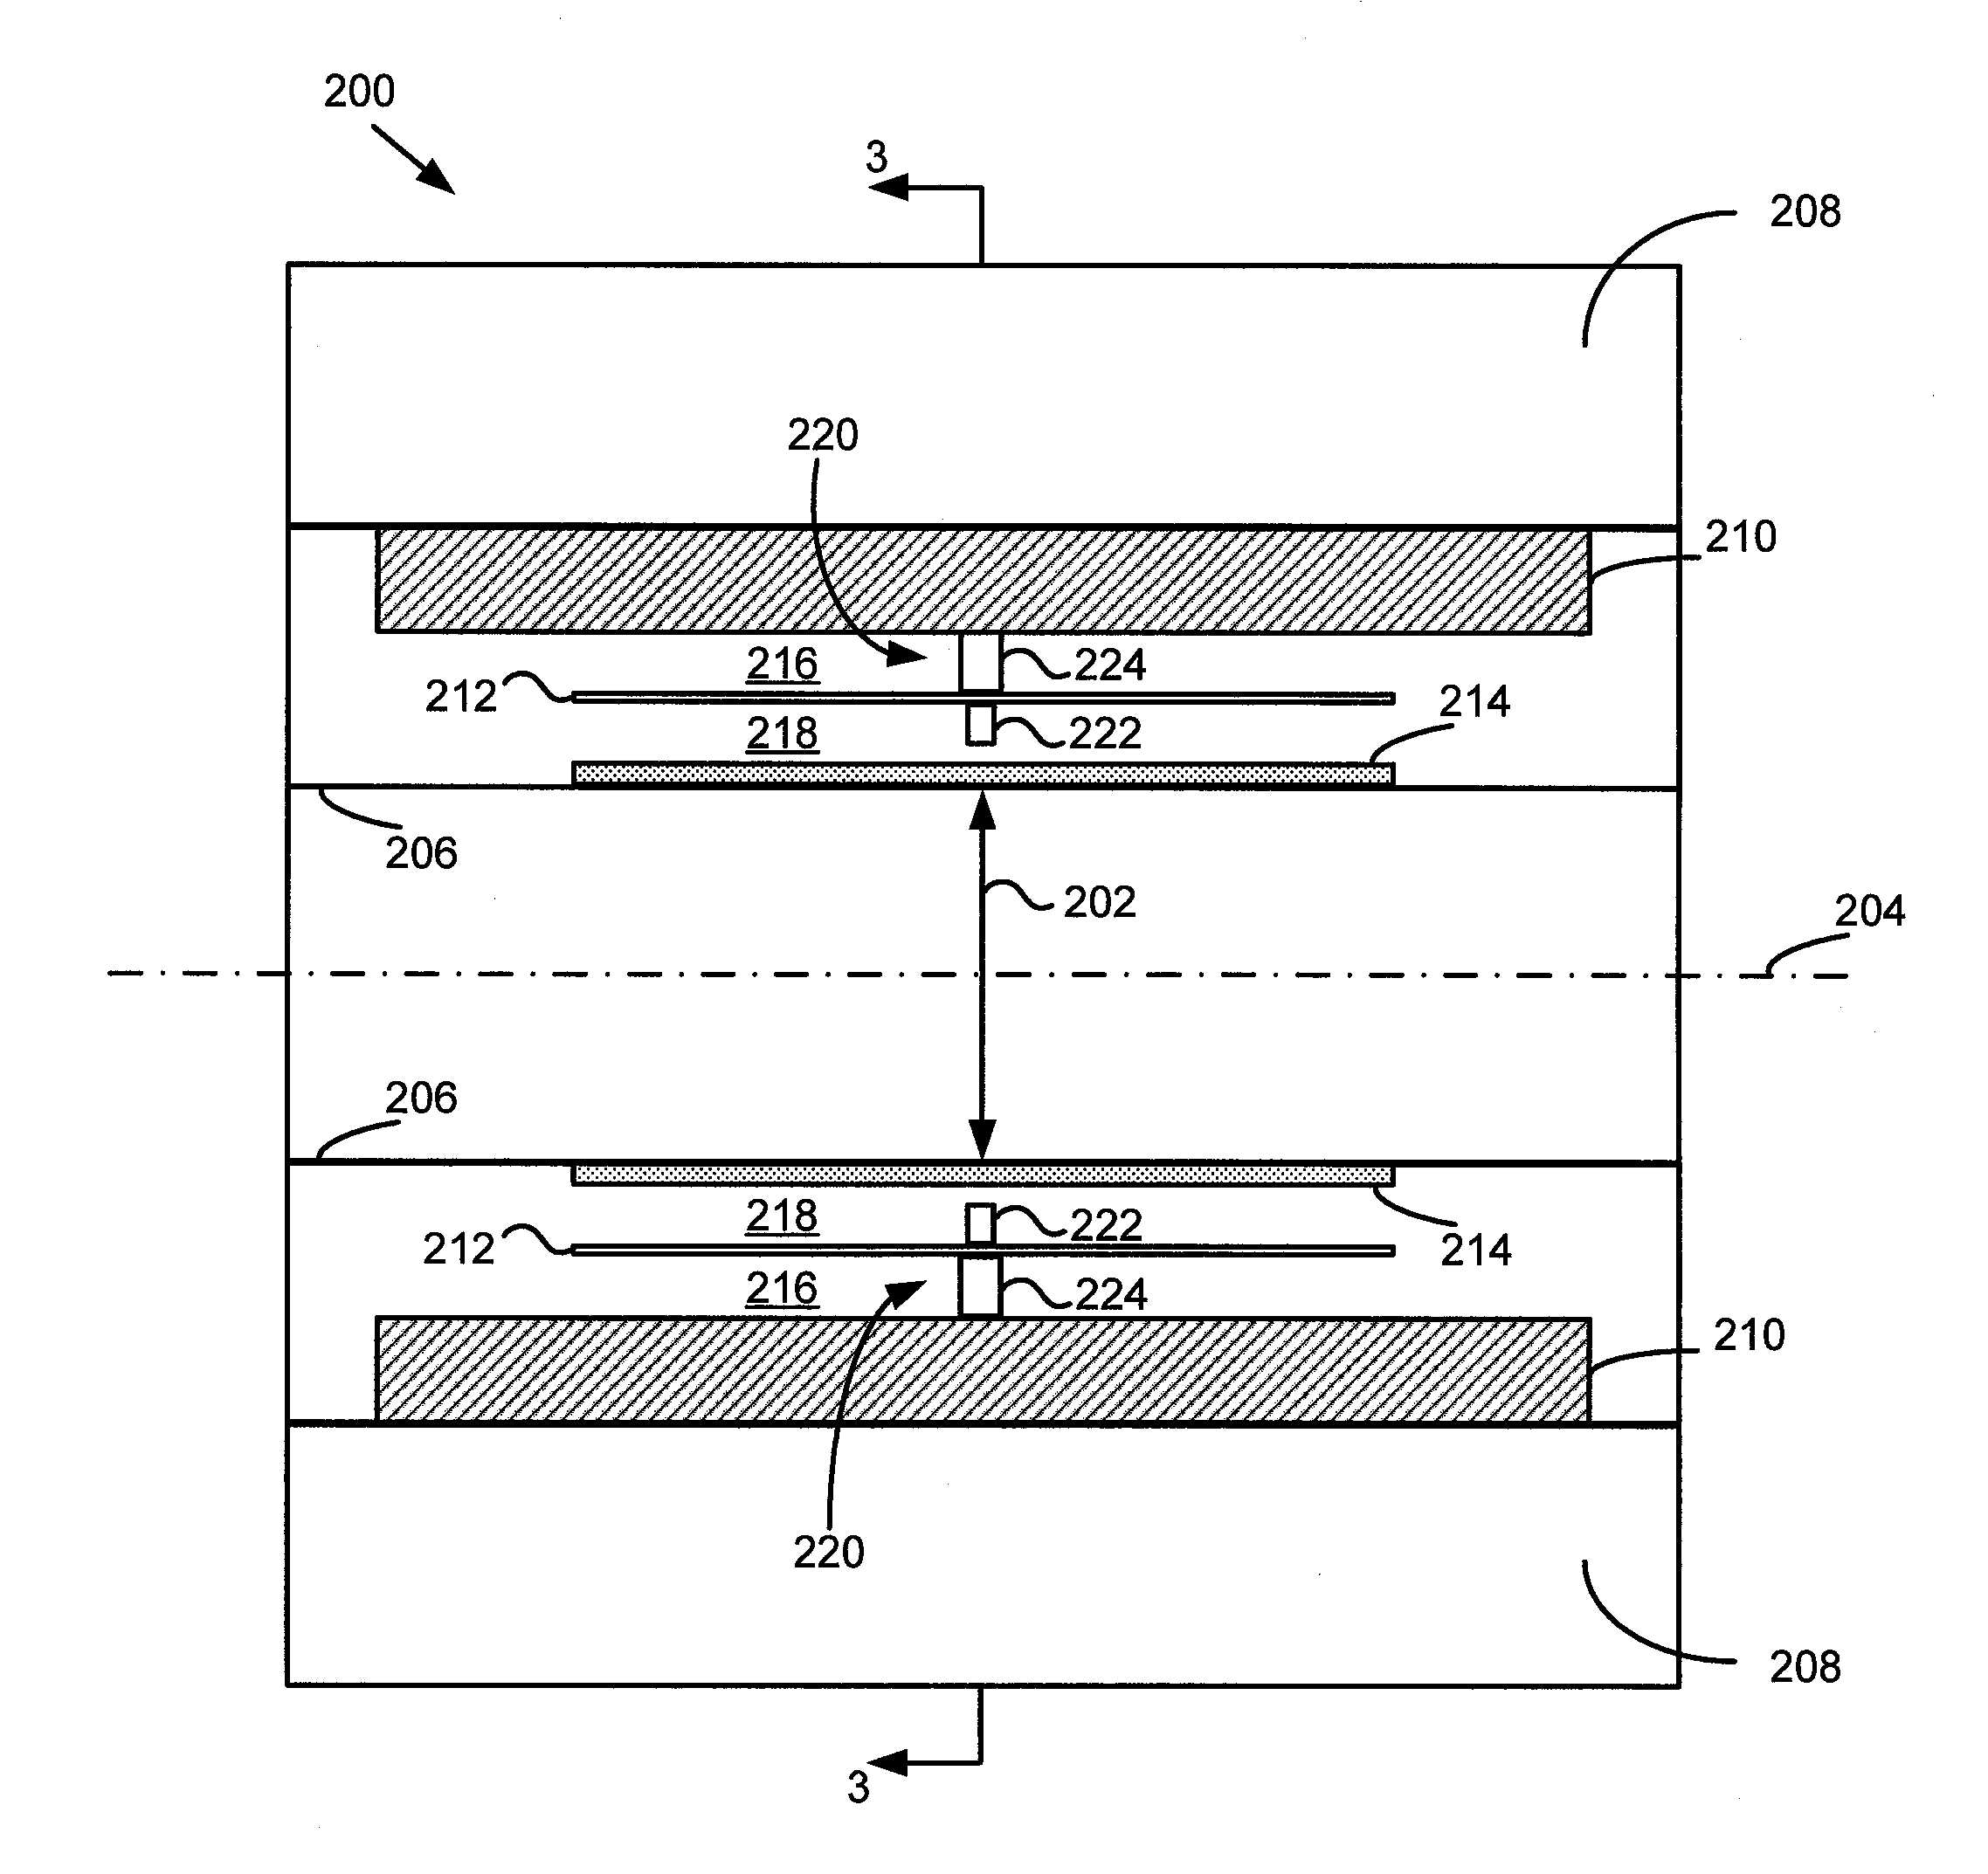 System and apparatus for detecting gamma rays in a PET/MRI scanner